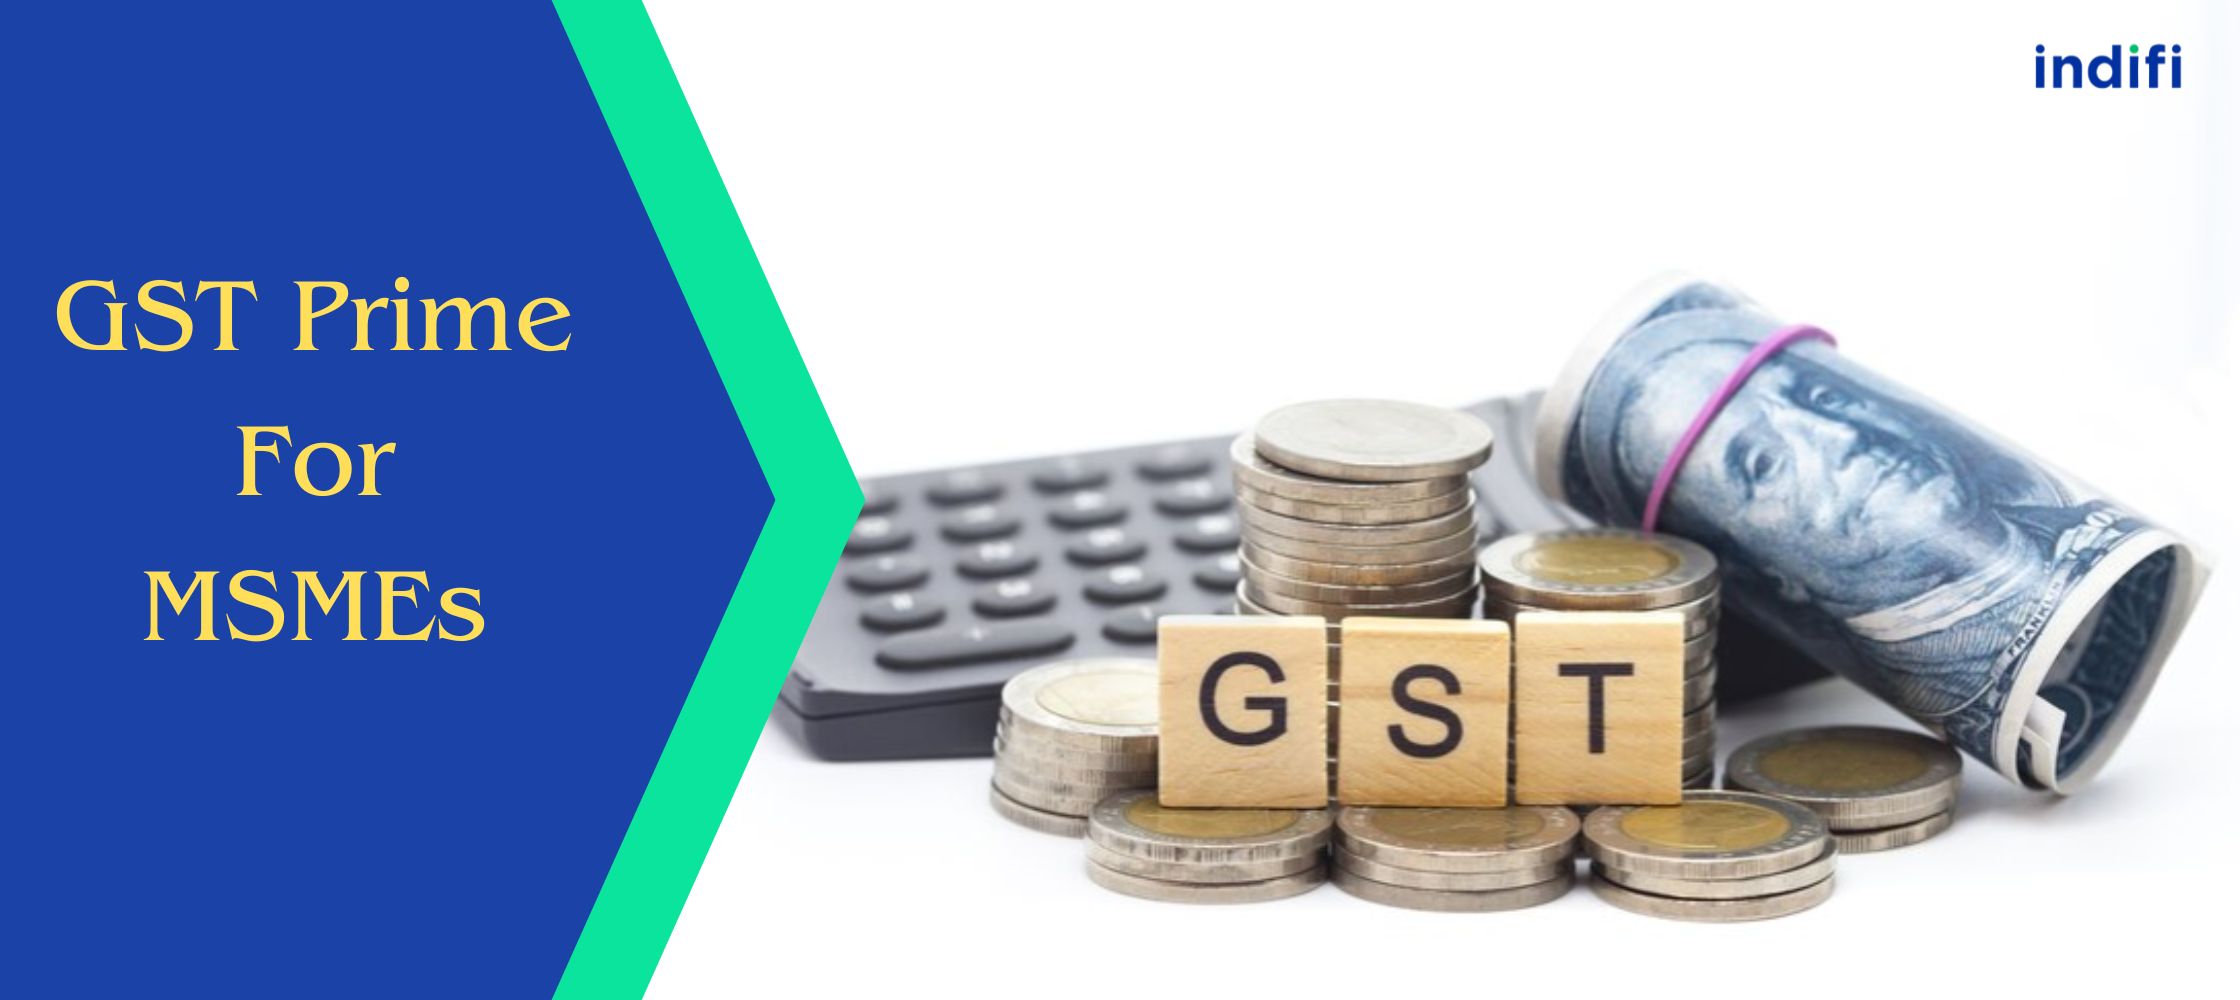 What is GST Prime?